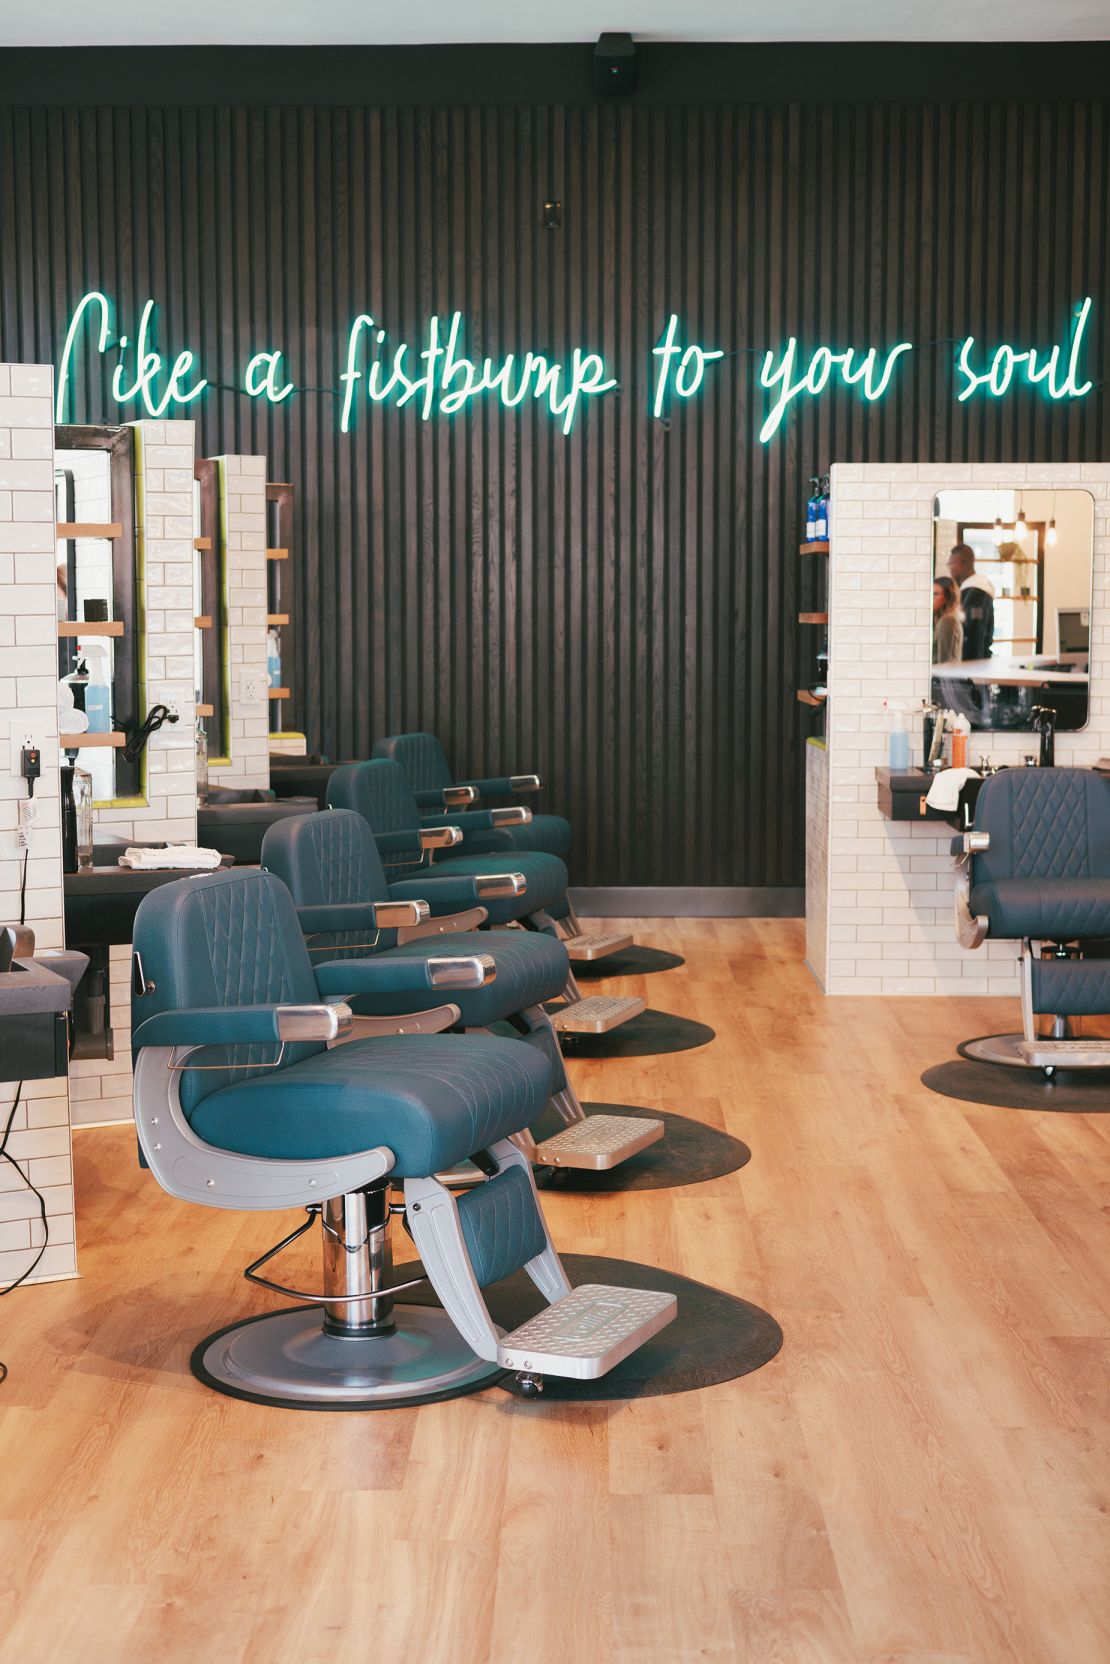 The barbershop is designed to uplift its staff and patrons.